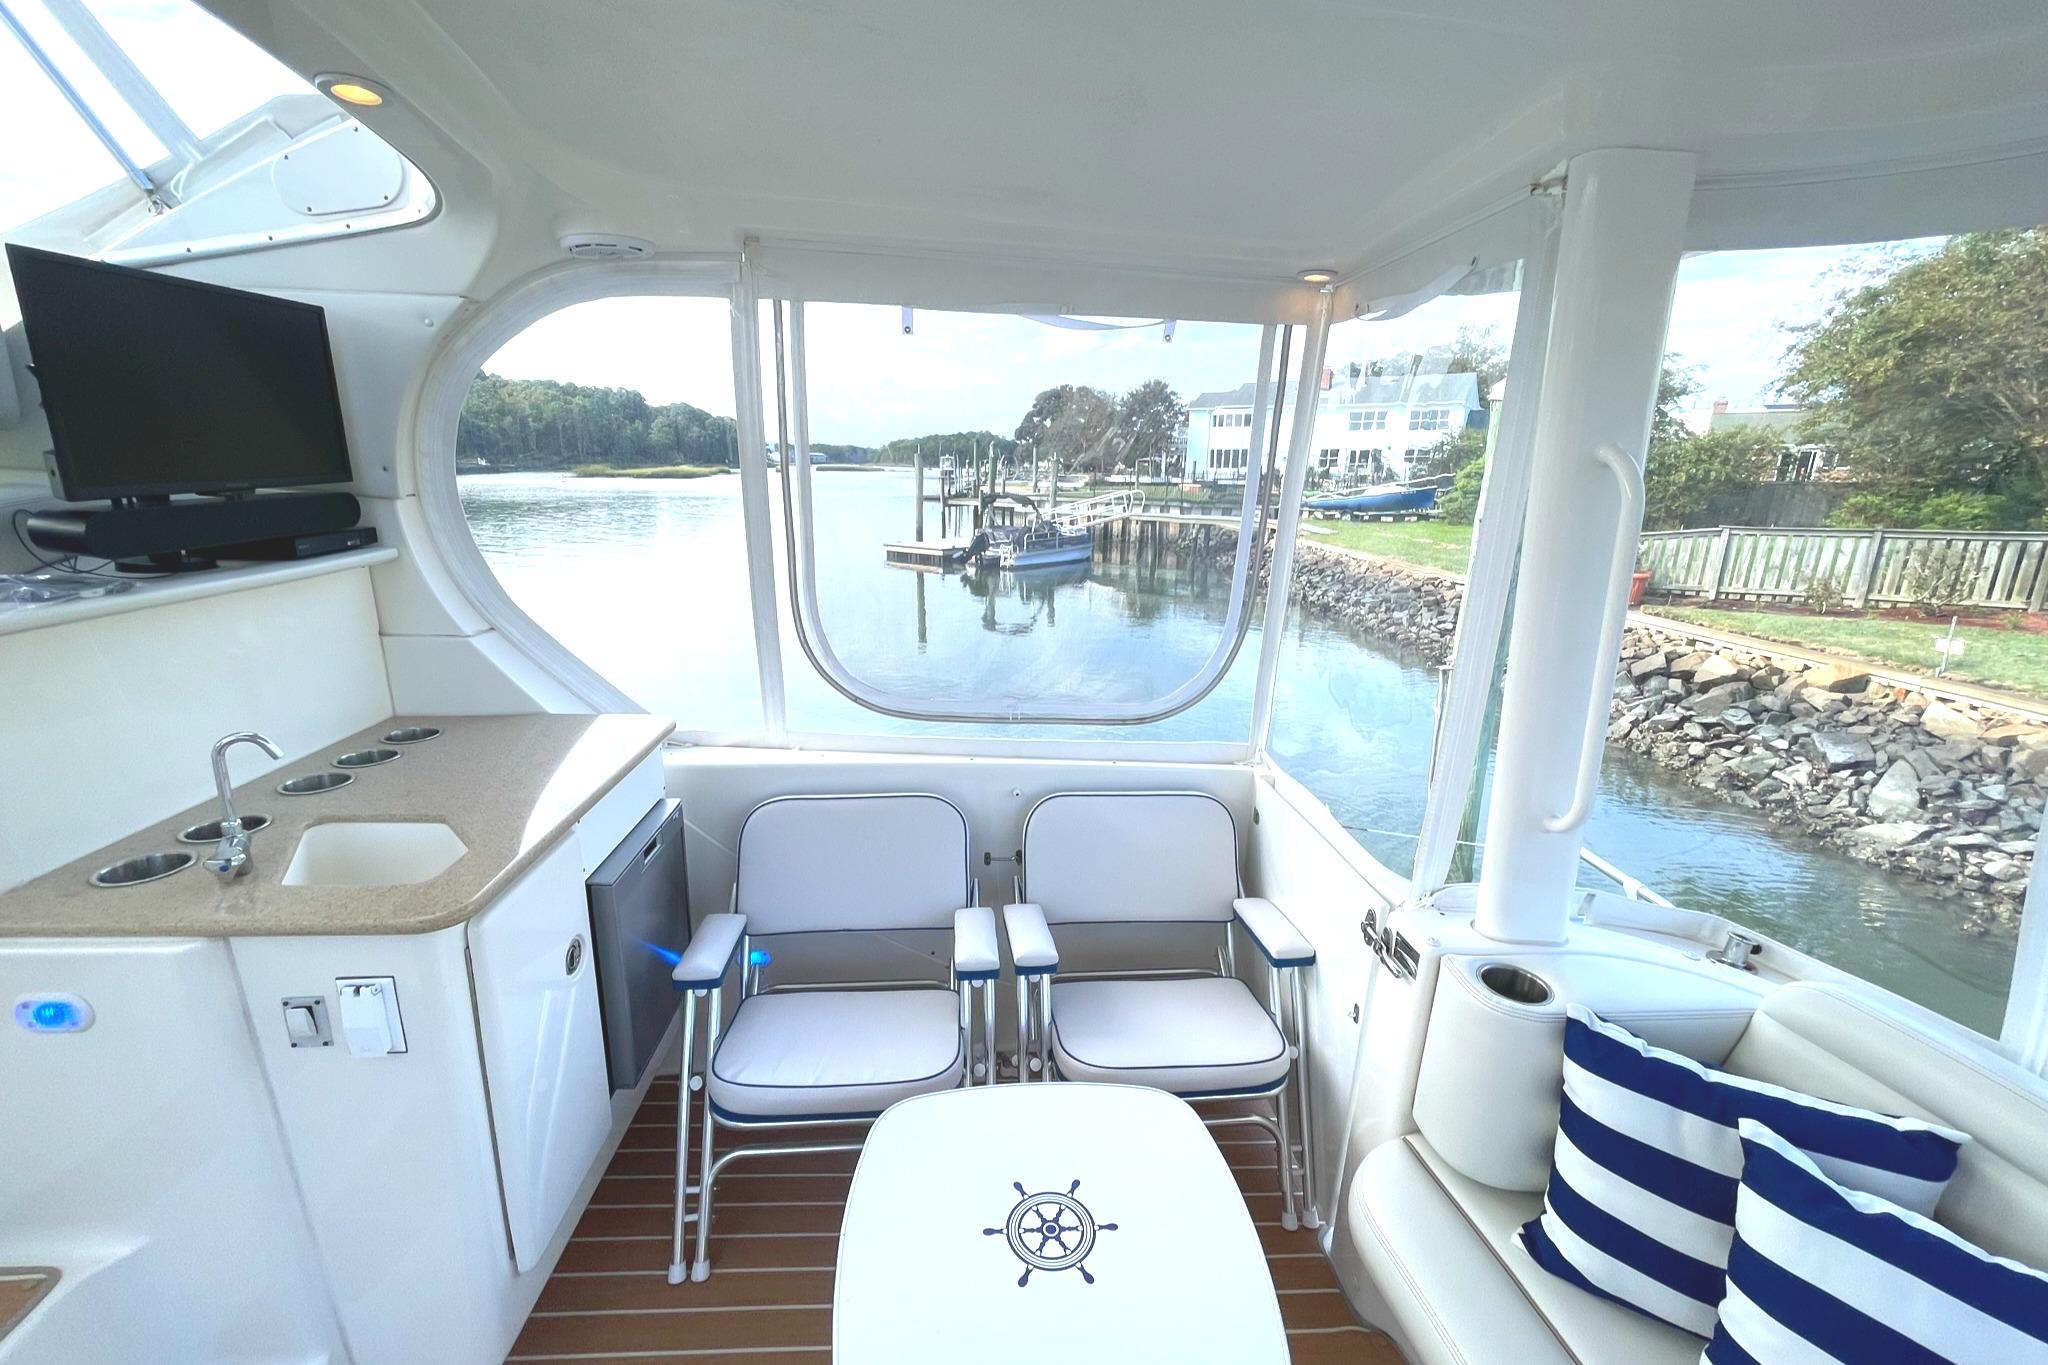 AFT DECK TO STBD. W/WETBAR & ENTERTAINMENT SYSTEM